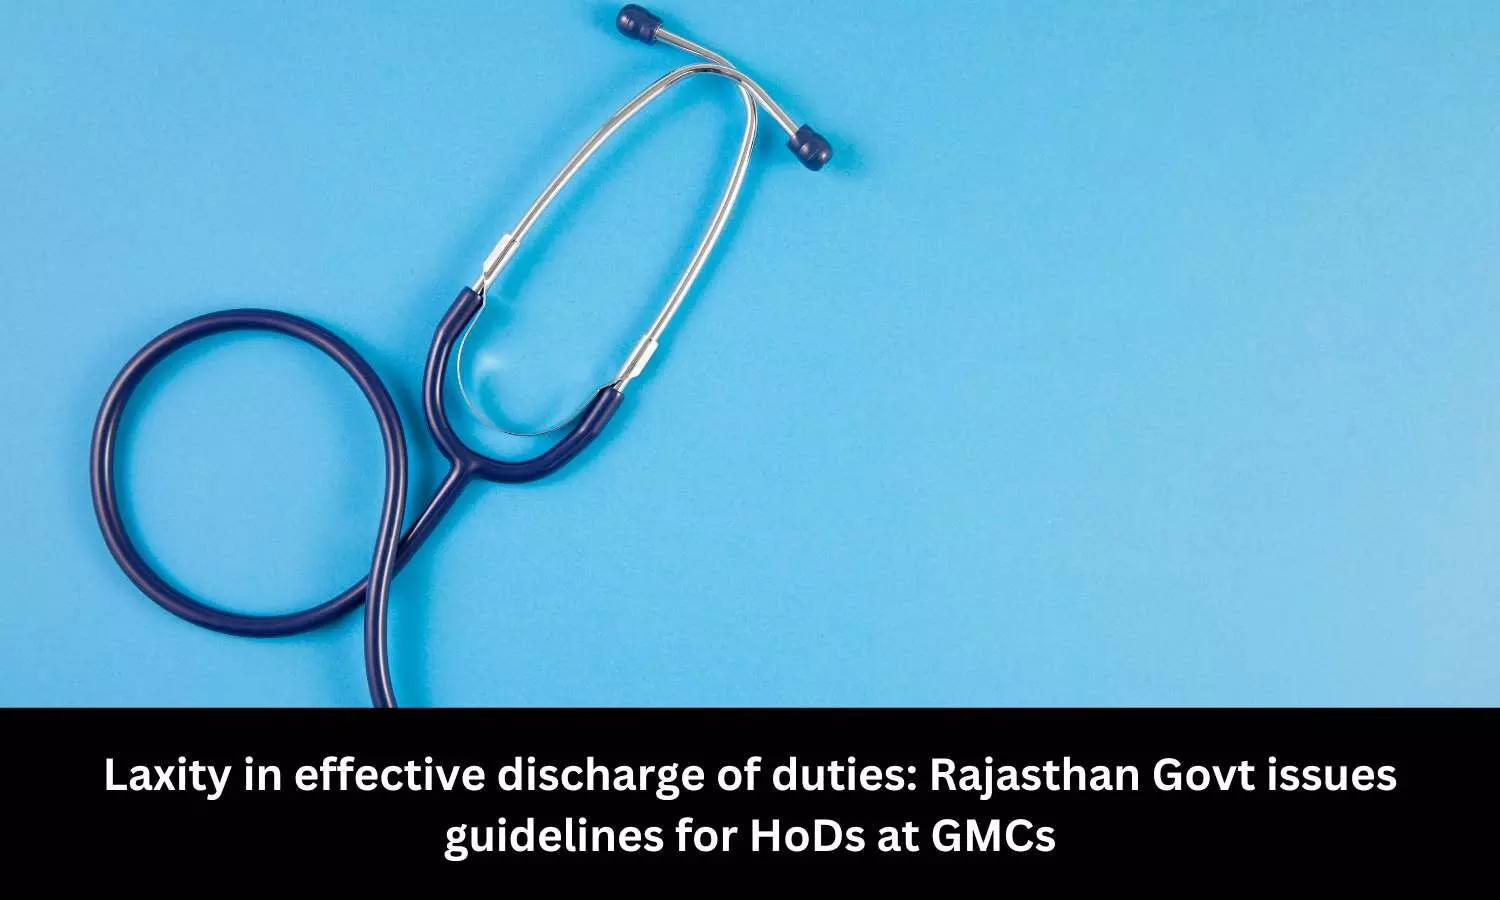 Laxity in effective discharge of duties: Rajasthan Govt issues guidelines for HoDs at GMCs